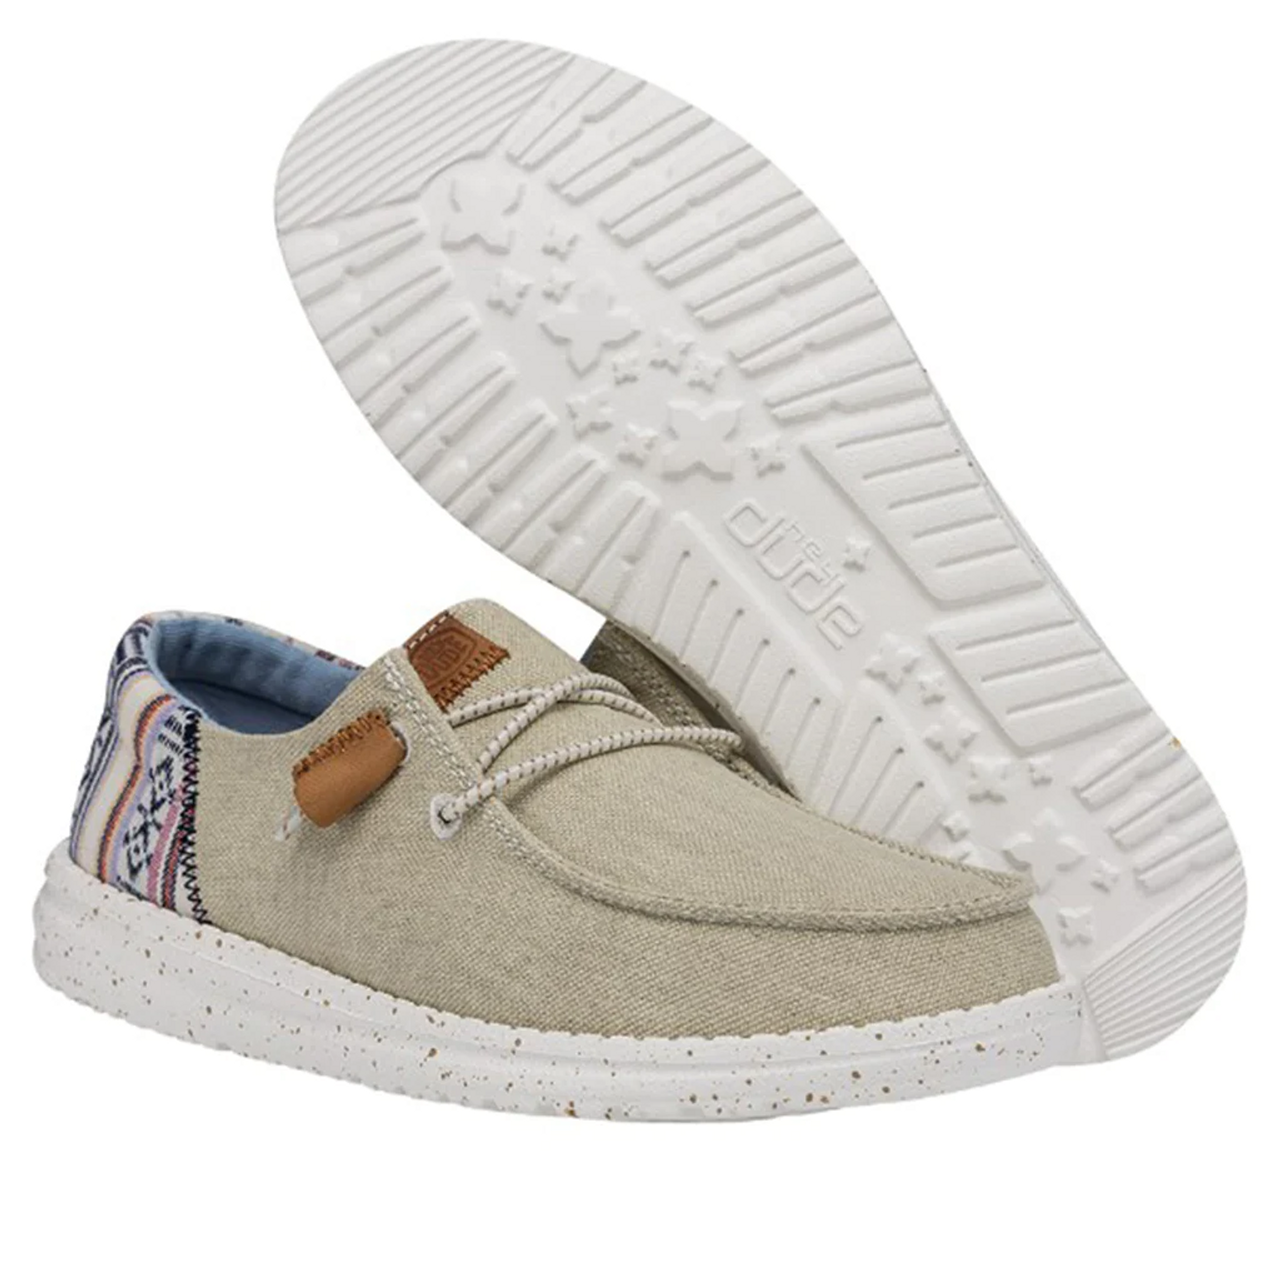 Hey Dude Womens Wendy Natural Washable Casual Shoes